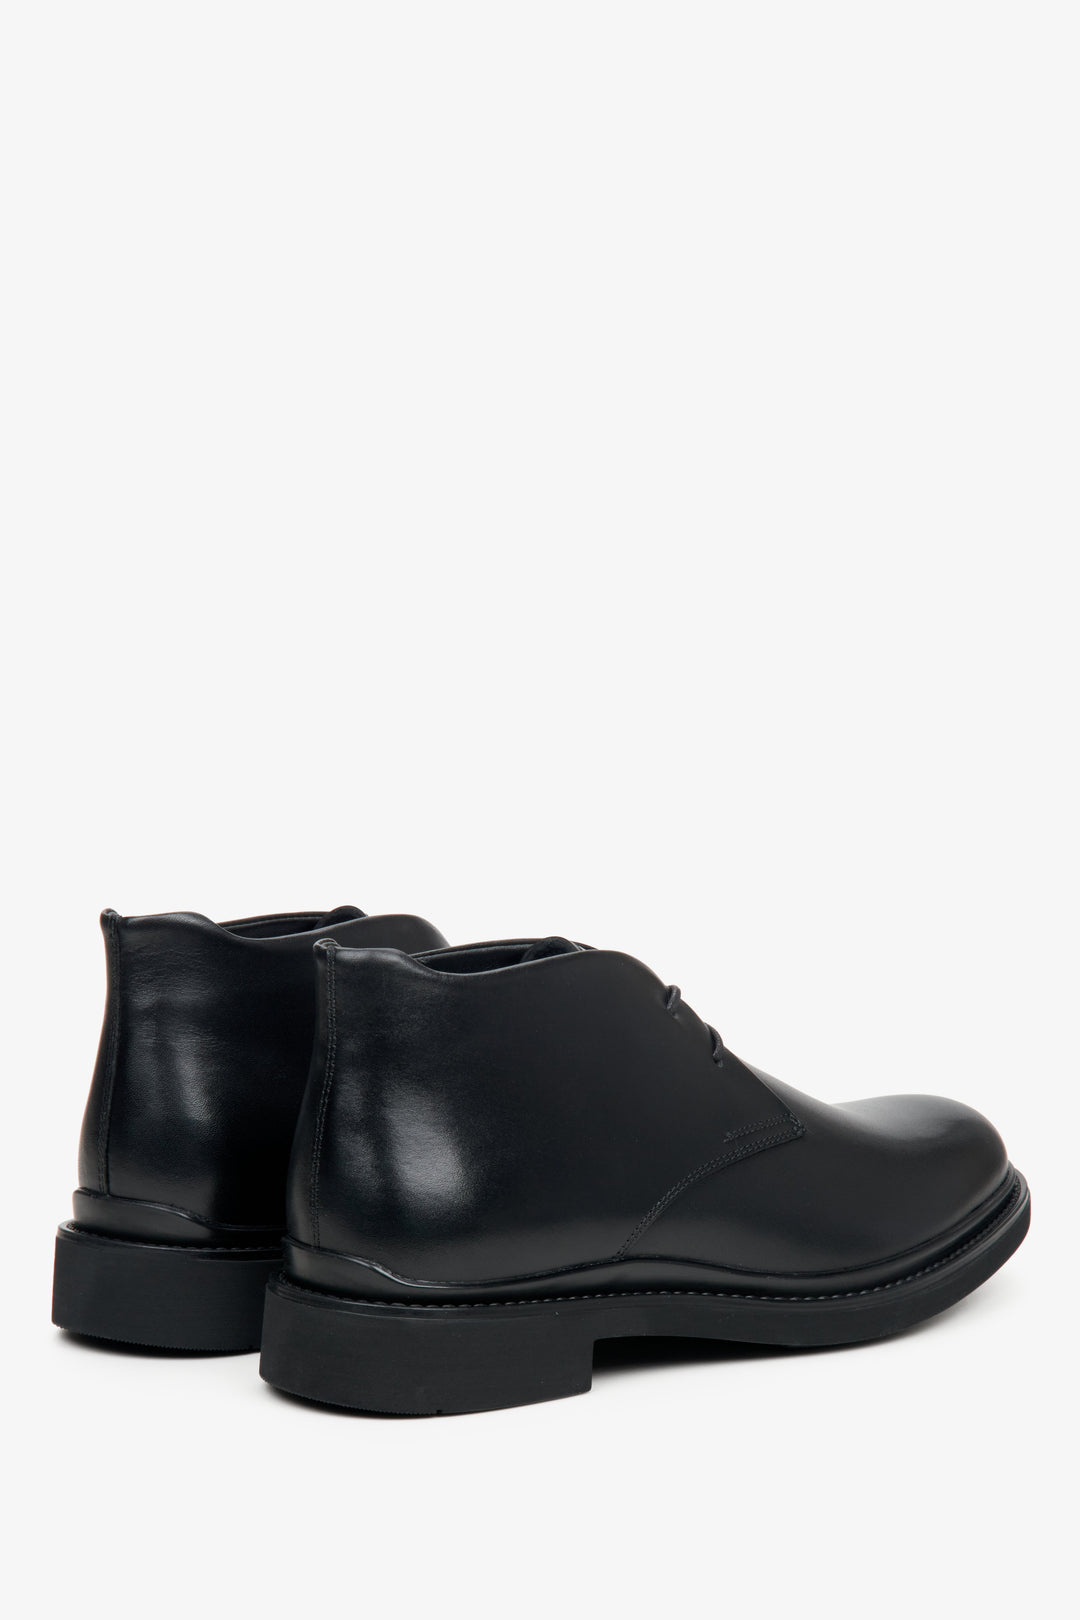 Men's black Estro autumn boots made of genuine leather - close-up on the heel and side line of the boot.